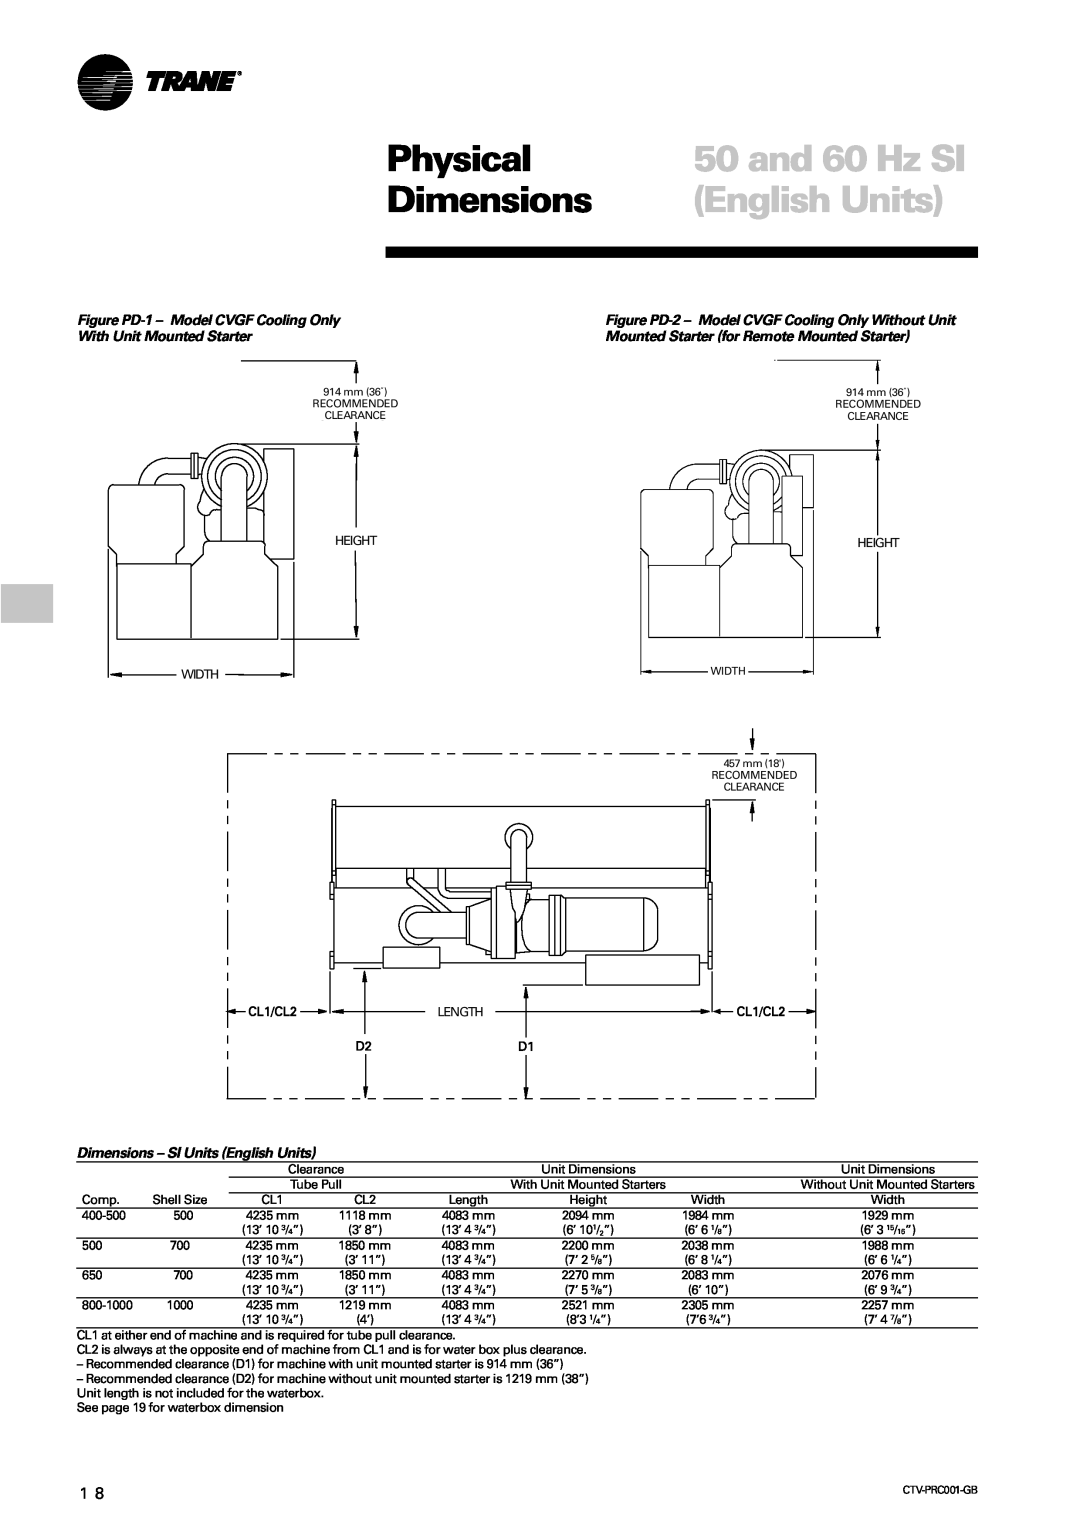 Trane manual Physical, and 60 Hz SI, Dimensions, English Units, Figure PD-1- Model CVGF Cooling Only 